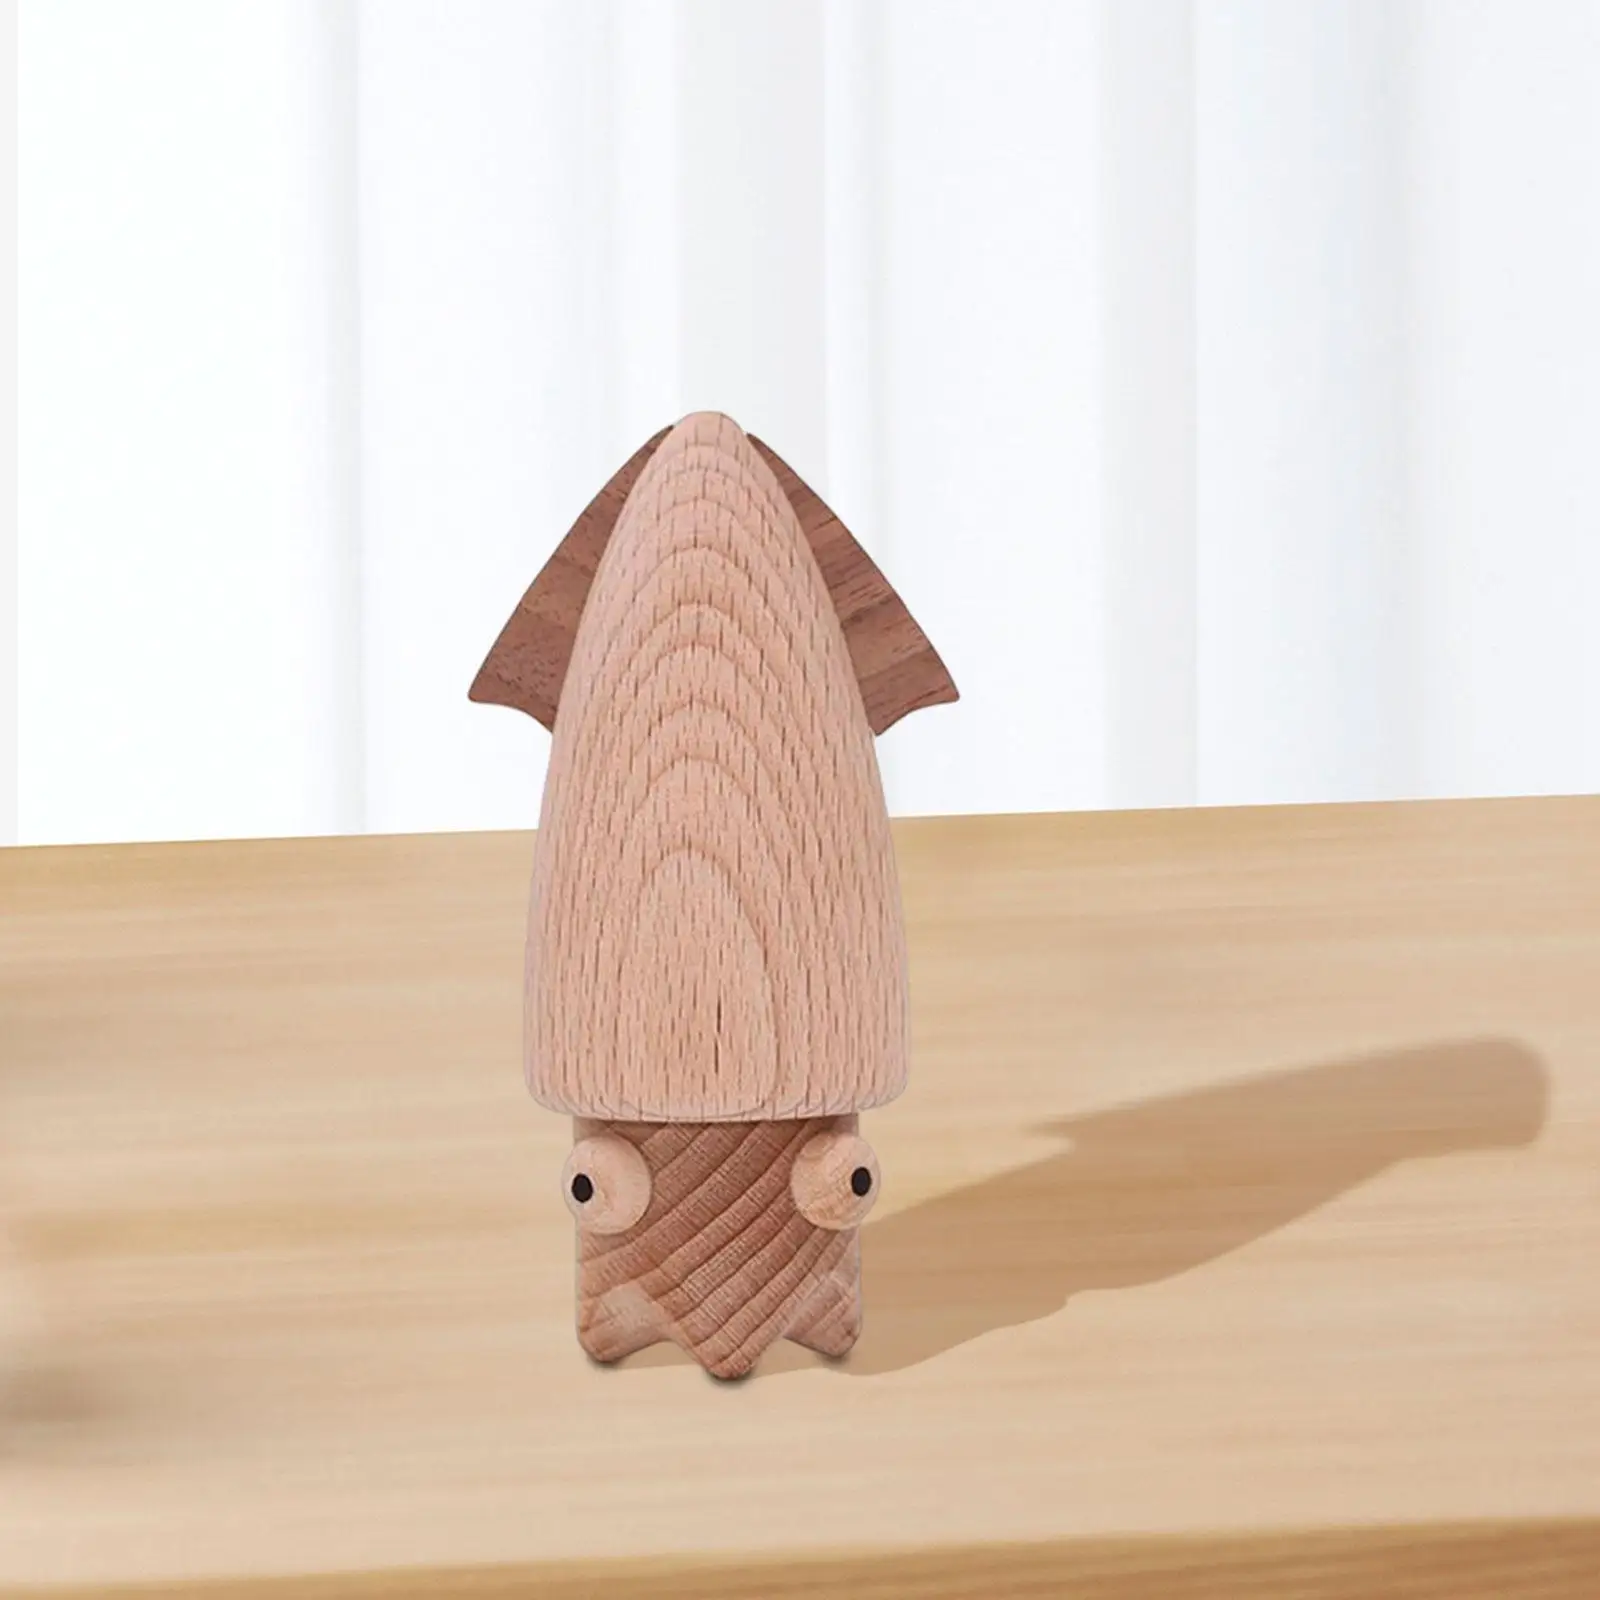 Toothpick Holder Ornament Countertop Decor Wooden Squid Shaped Dispenser for Cafes